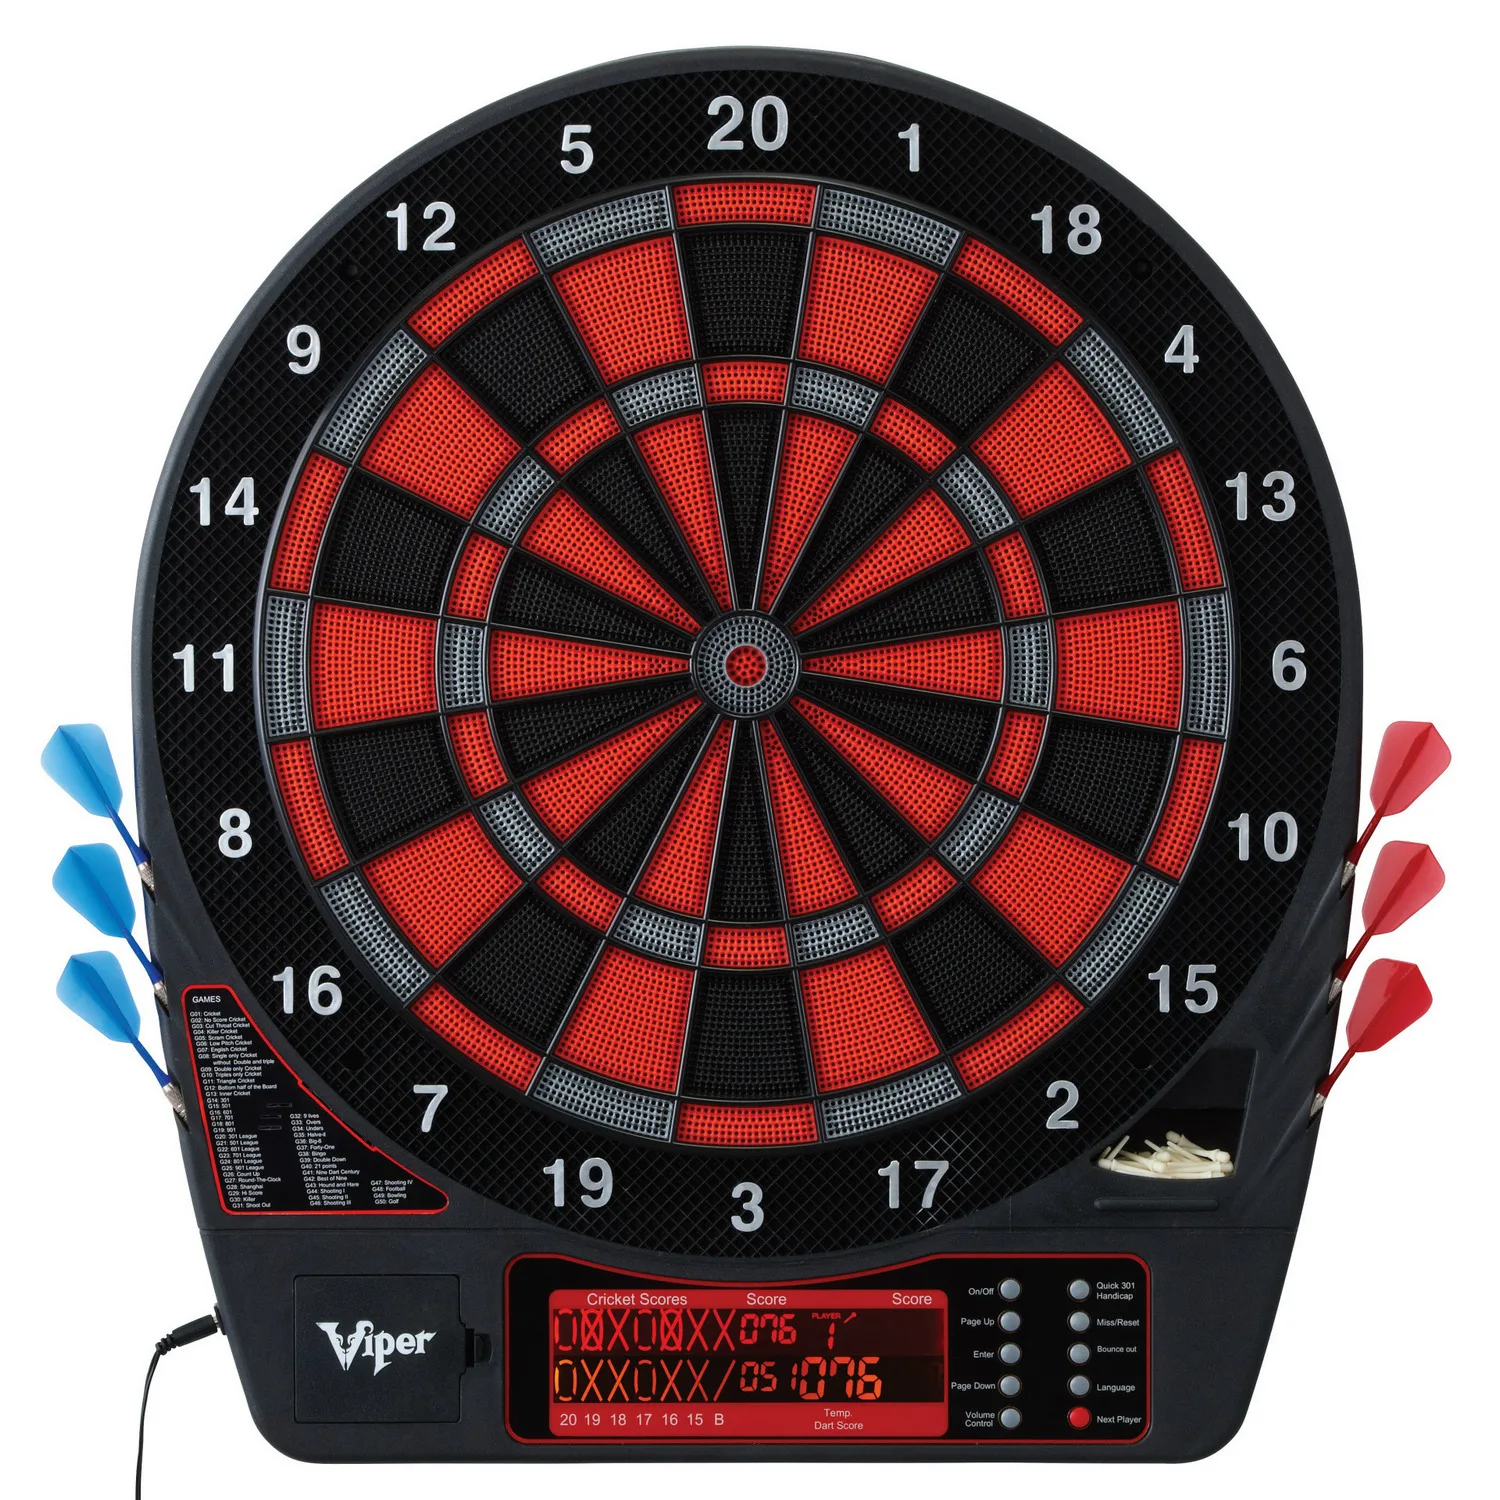 Original  Viper Specter Electronic Dartboard Pro Size 50 Games Height LCD Display Scoreboard with Impact-Tough Nylon Target tactical ptt y line microphone kit electronic headset adapter for howard leight impact zohan em054 sordin ipsc shooting headset